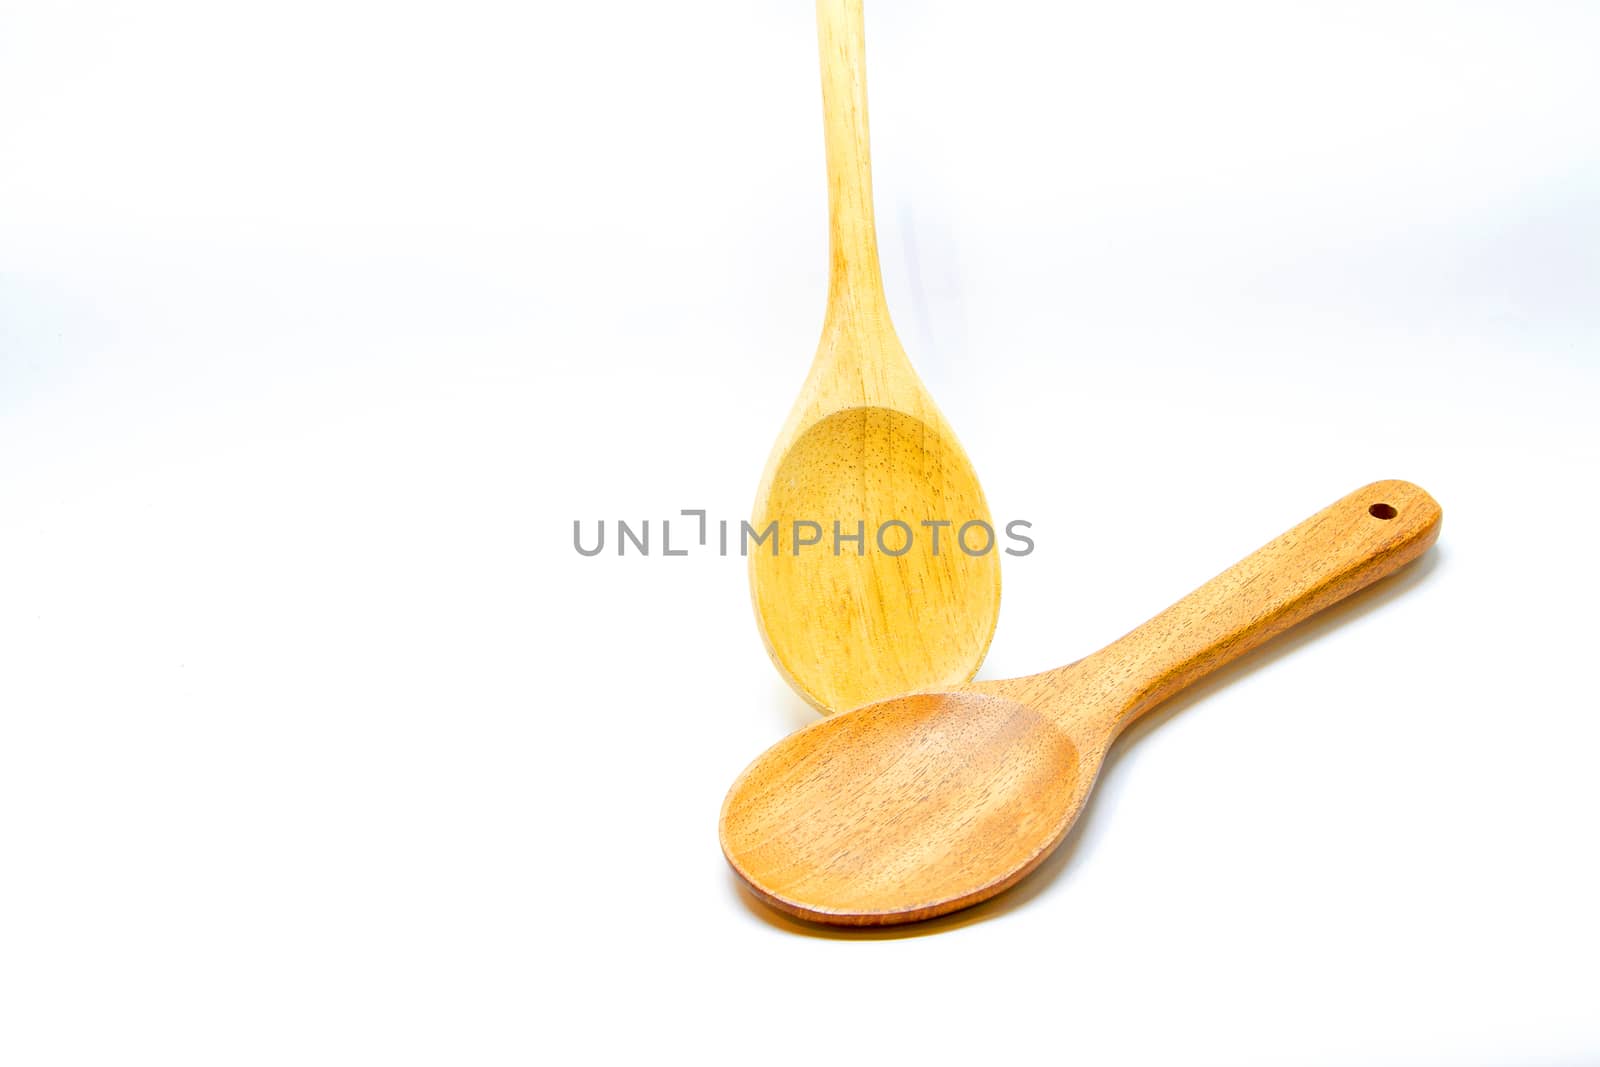 Two Brown wooden spoon on white background